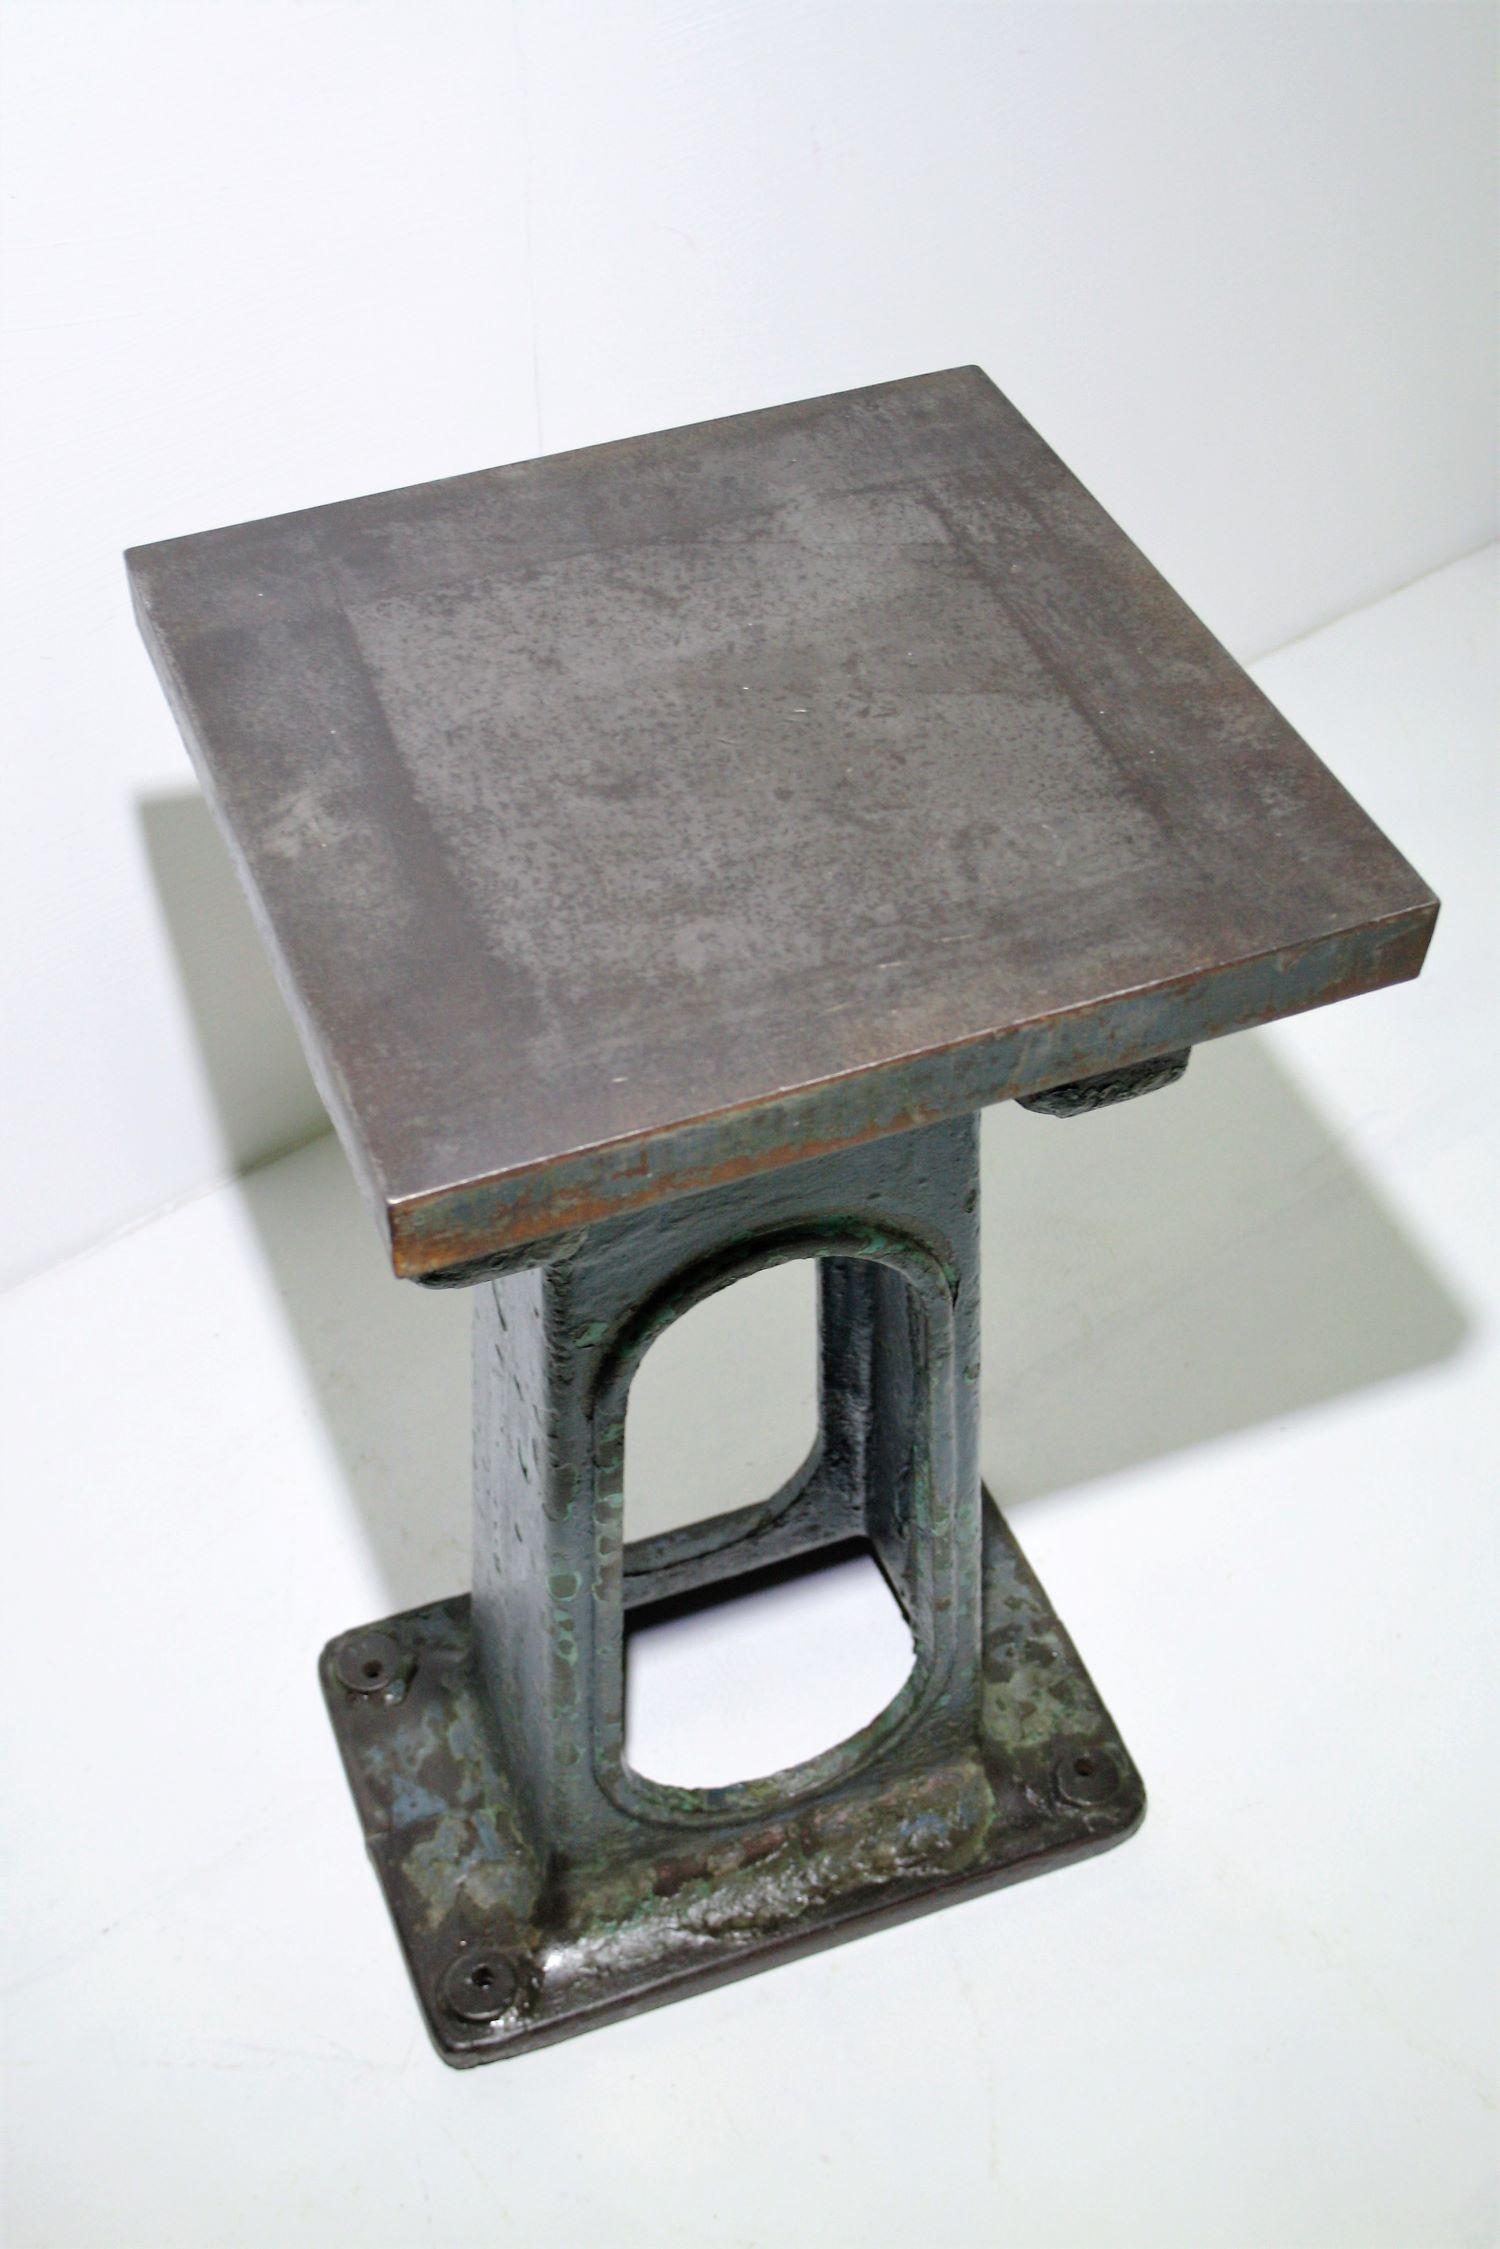 Cast Small Industrial Heavy Form Cat Iron Engineers Table Superb Patina Colour